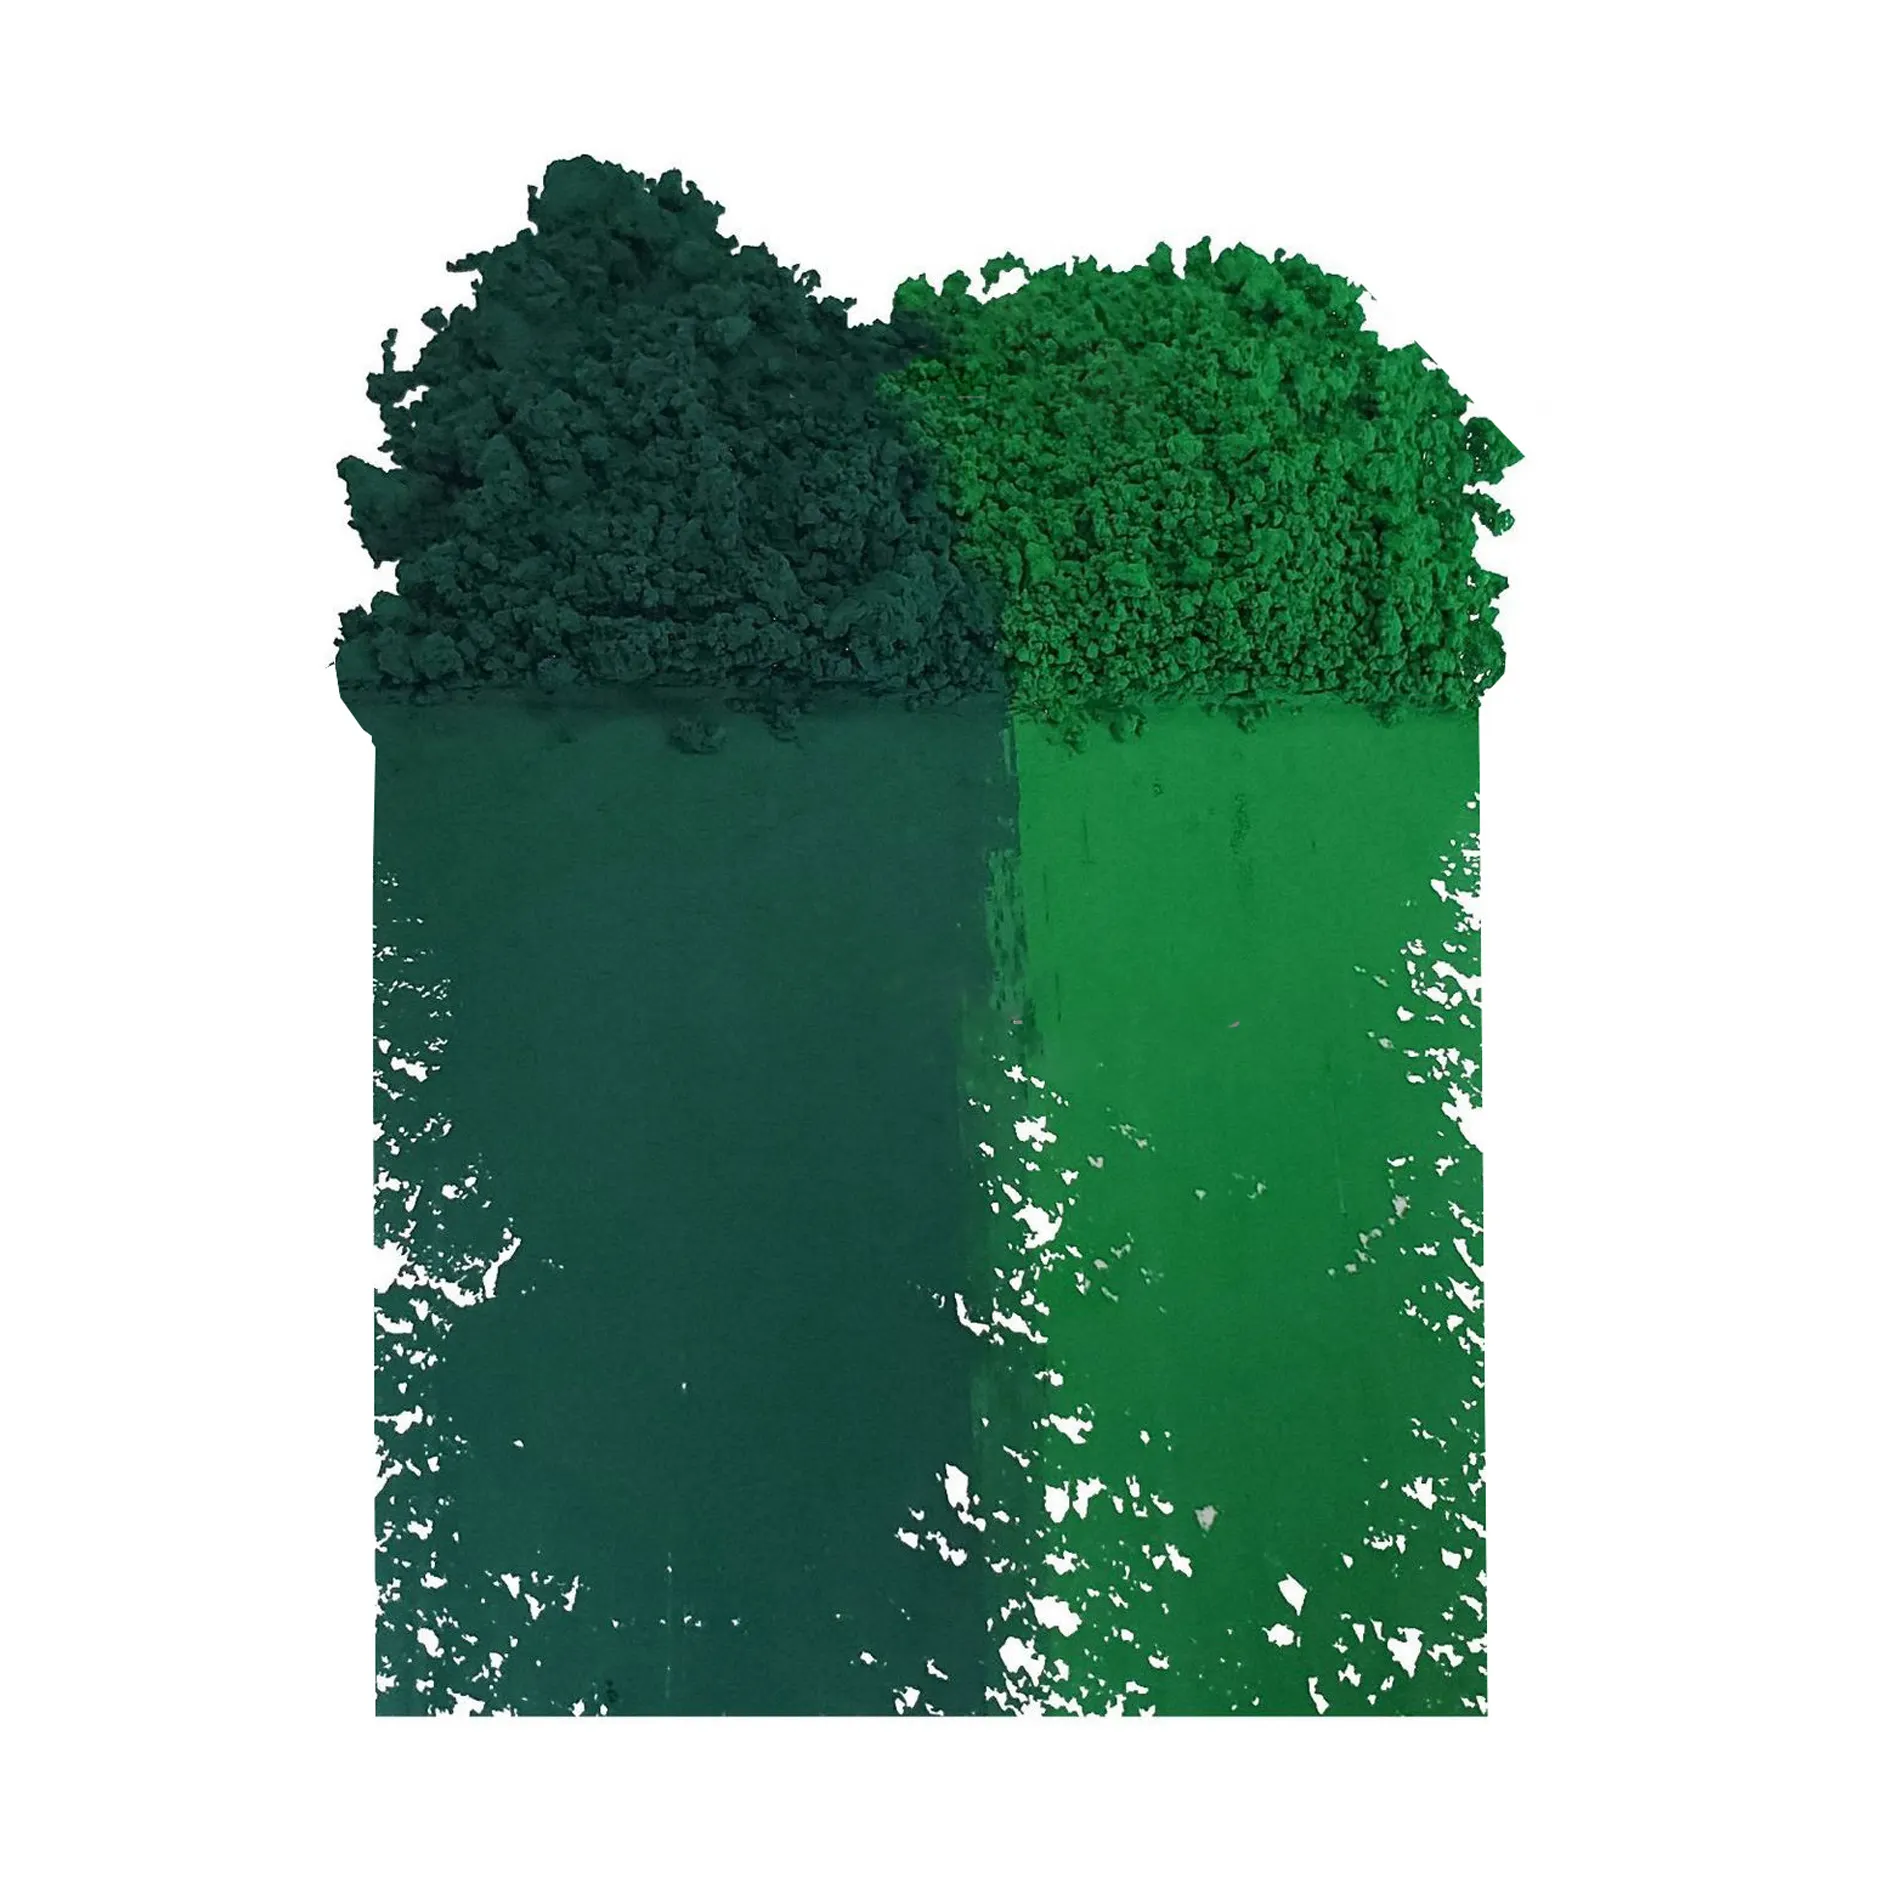 CICP High Infrared Reflection Camouflage Material Cobalt Chromite Green Pigment Green 26